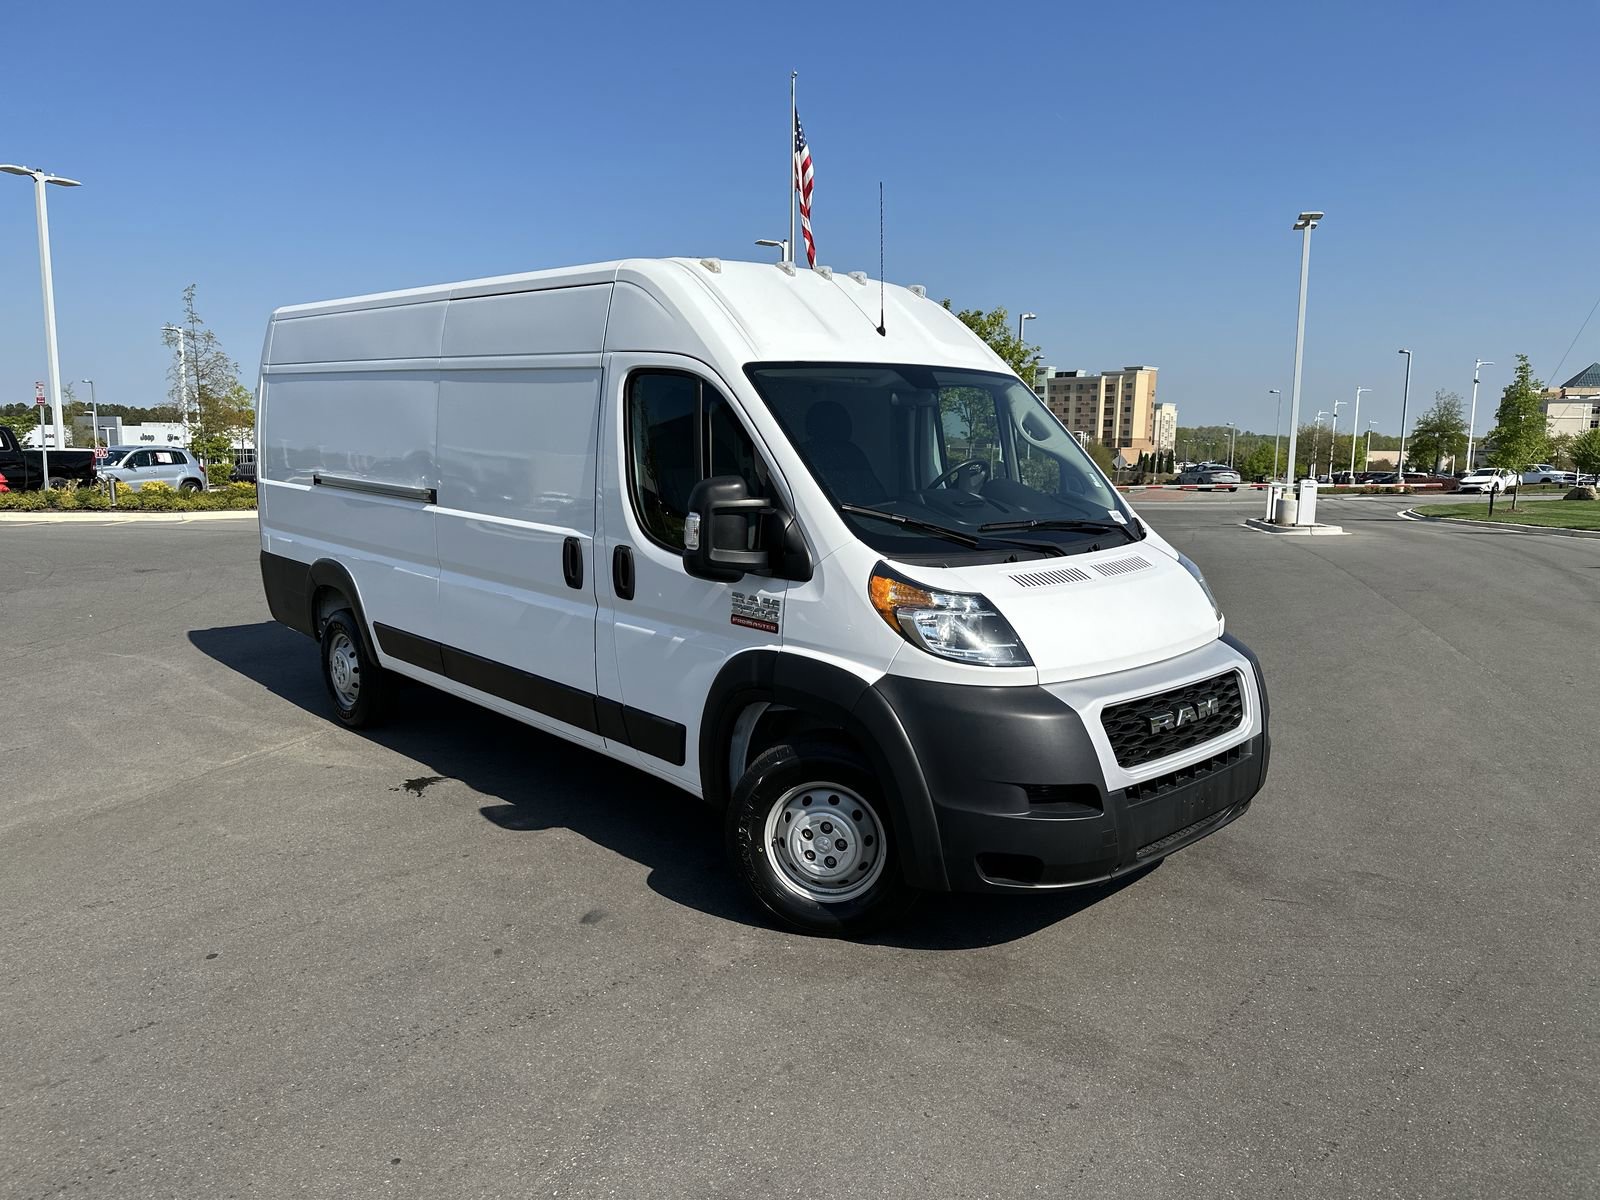 Certified Pre-Owned 2020 Ram ProMaster Cargo Van FWD 3500 High Roof 159 WB  EXT in Buford #P41022 | Mall of Georgia MINI